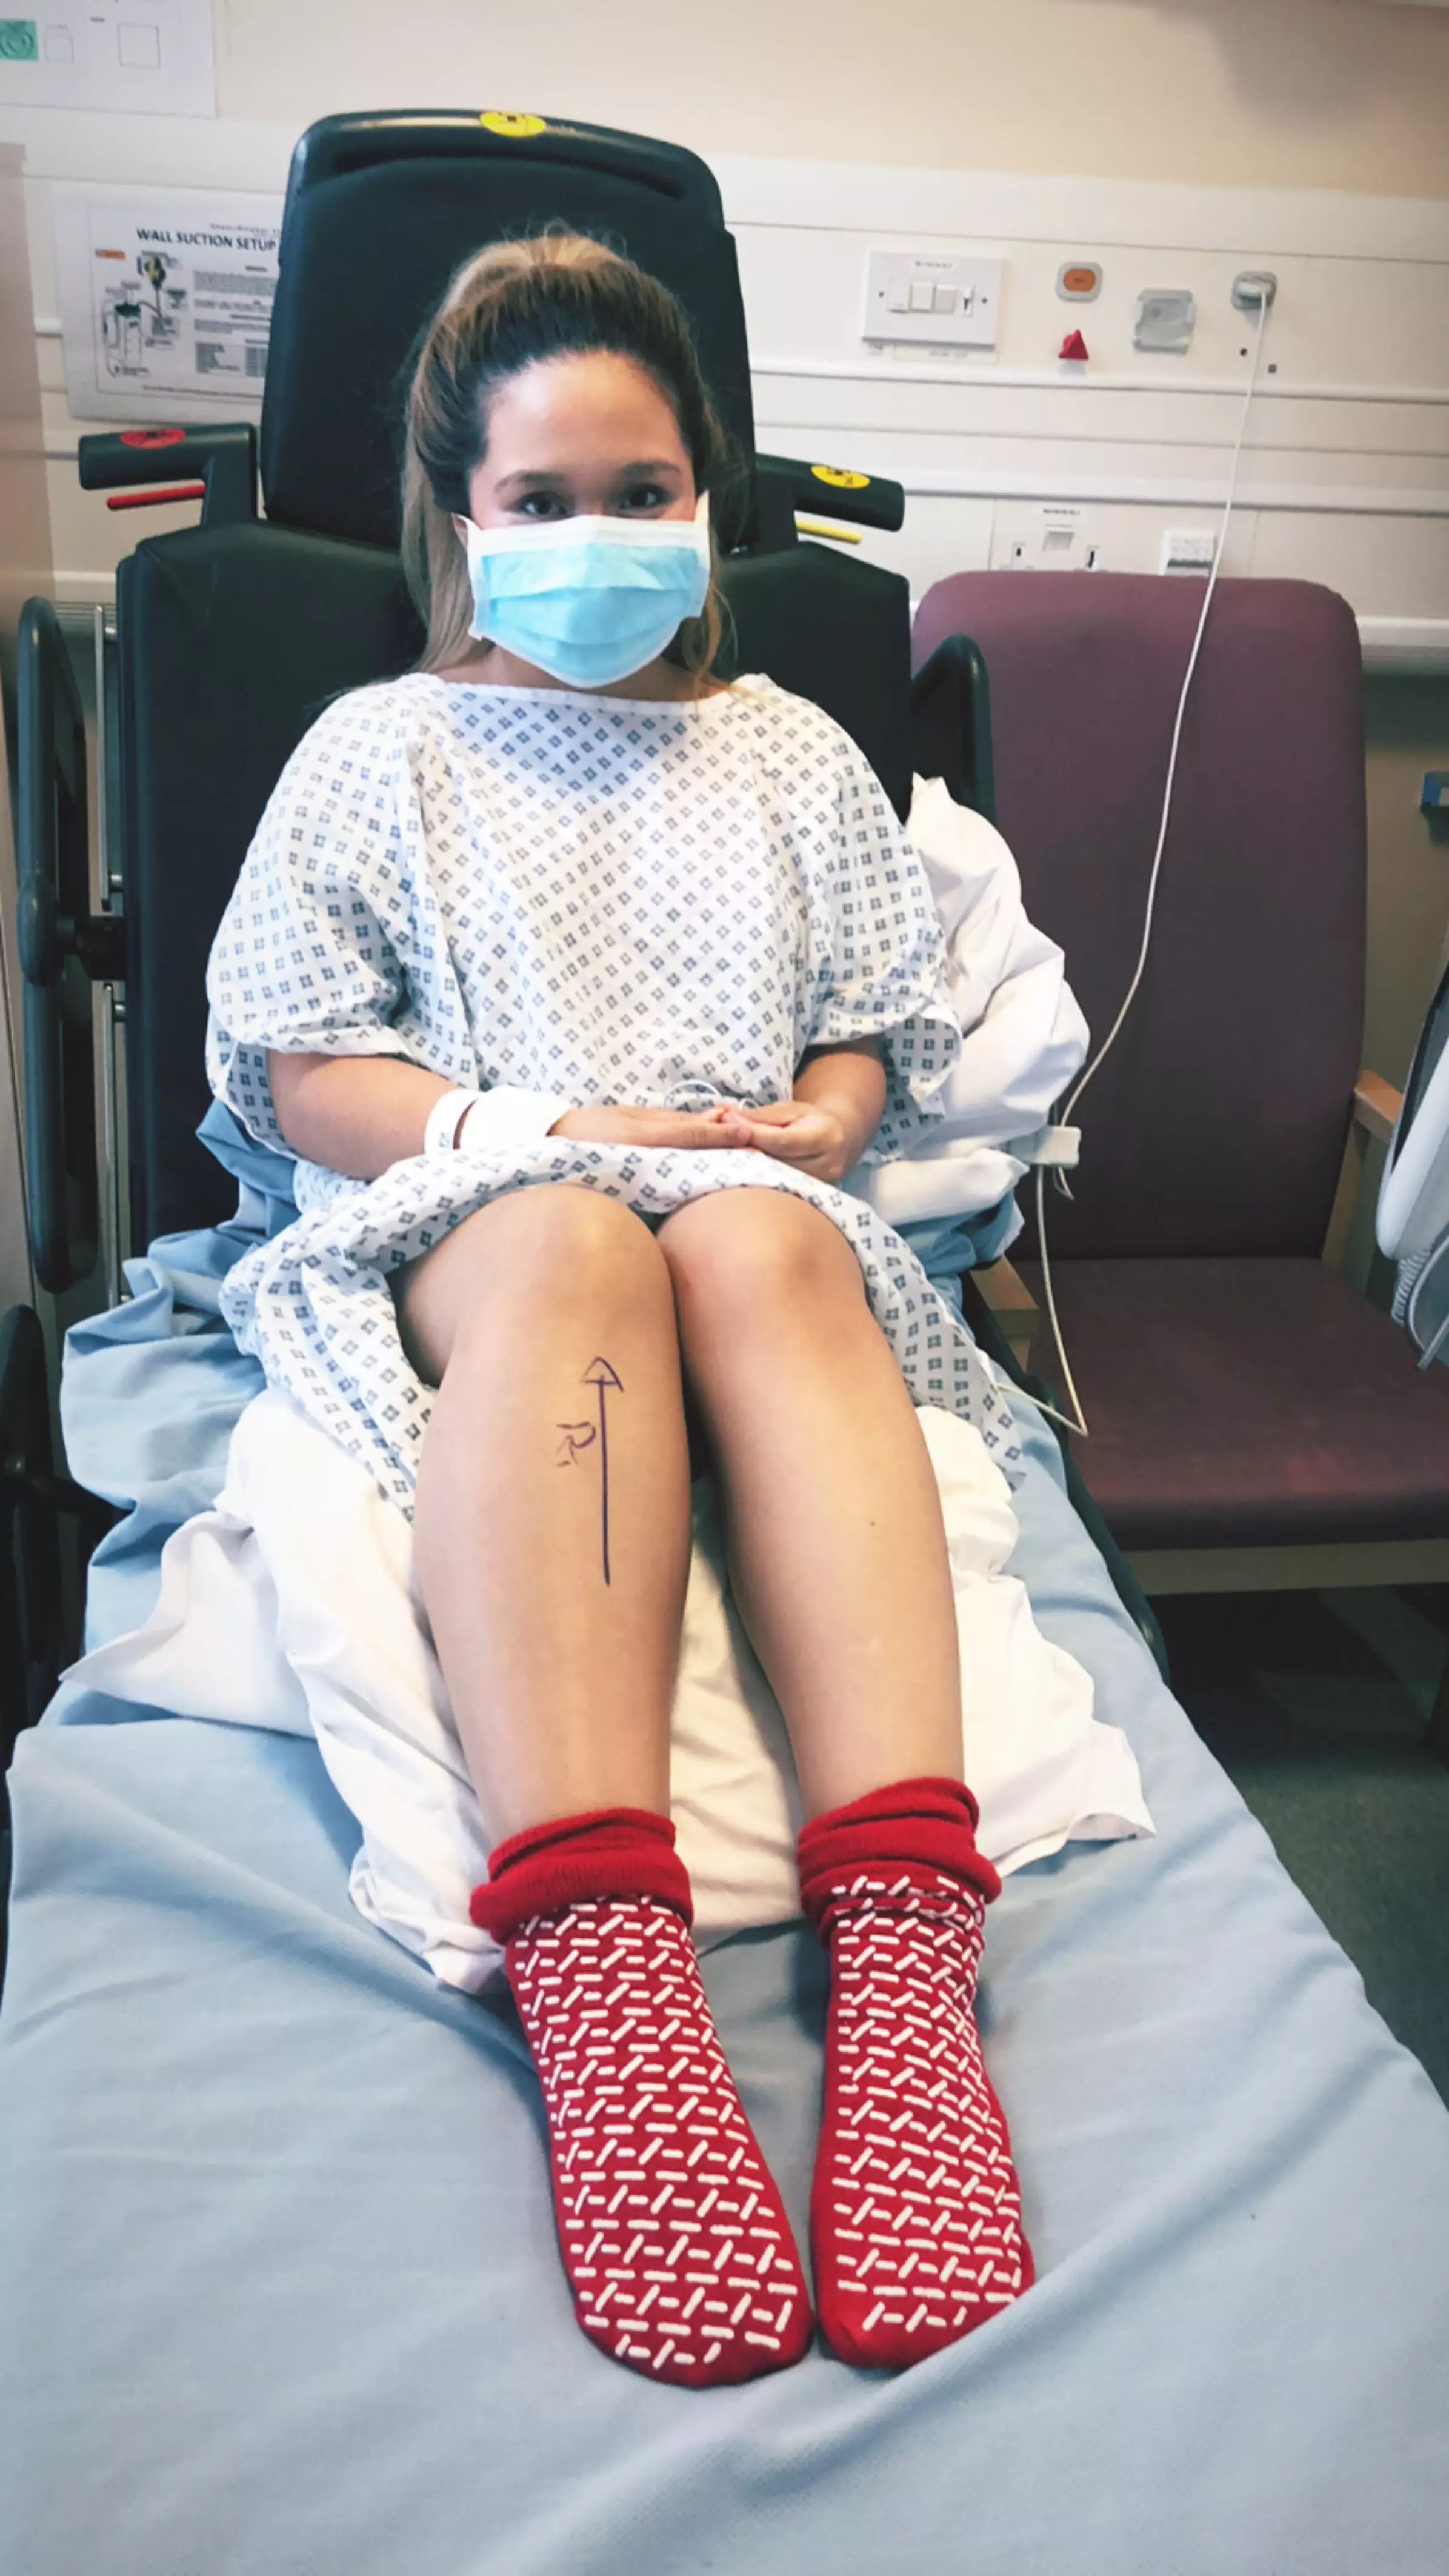 Sette was devastated when doctors said her leg would need to be amputated (